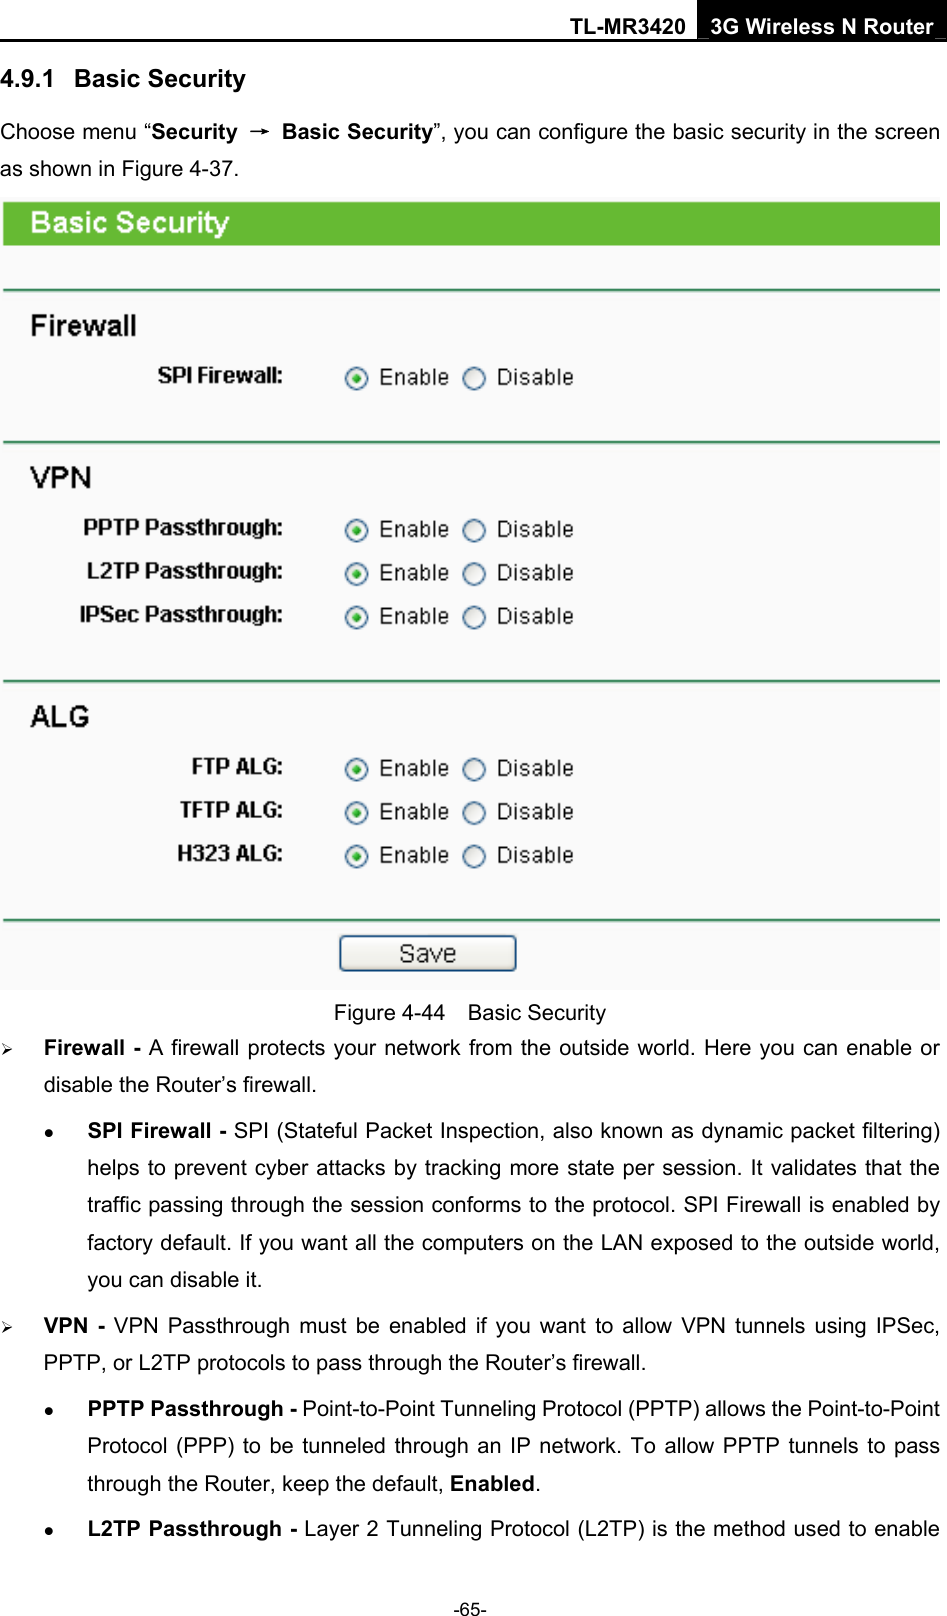 TL-MR3420 3G Wireless N Router -65- 4.9.1  Basic Security Choose menu “Security  → Basic Security”, you can configure the basic security in the screen as shown in Figure 4-37.  Figure 4-44  Basic Security ¾ Firewall - A firewall protects your network from the outside world. Here you can enable or disable the Router’s firewall. z SPI Firewall - SPI (Stateful Packet Inspection, also known as dynamic packet filtering) helps to prevent cyber attacks by tracking more state per session. It validates that the traffic passing through the session conforms to the protocol. SPI Firewall is enabled by factory default. If you want all the computers on the LAN exposed to the outside world, you can disable it.   ¾ VPN - VPN Passthrough must be enabled if you want to allow VPN tunnels using IPSec, PPTP, or L2TP protocols to pass through the Router’s firewall. z PPTP Passthrough - Point-to-Point Tunneling Protocol (PPTP) allows the Point-to-Point Protocol (PPP) to be tunneled through an IP network. To allow PPTP tunnels to pass through the Router, keep the default, Enabled.  z L2TP Passthrough - Layer 2 Tunneling Protocol (L2TP) is the method used to enable 